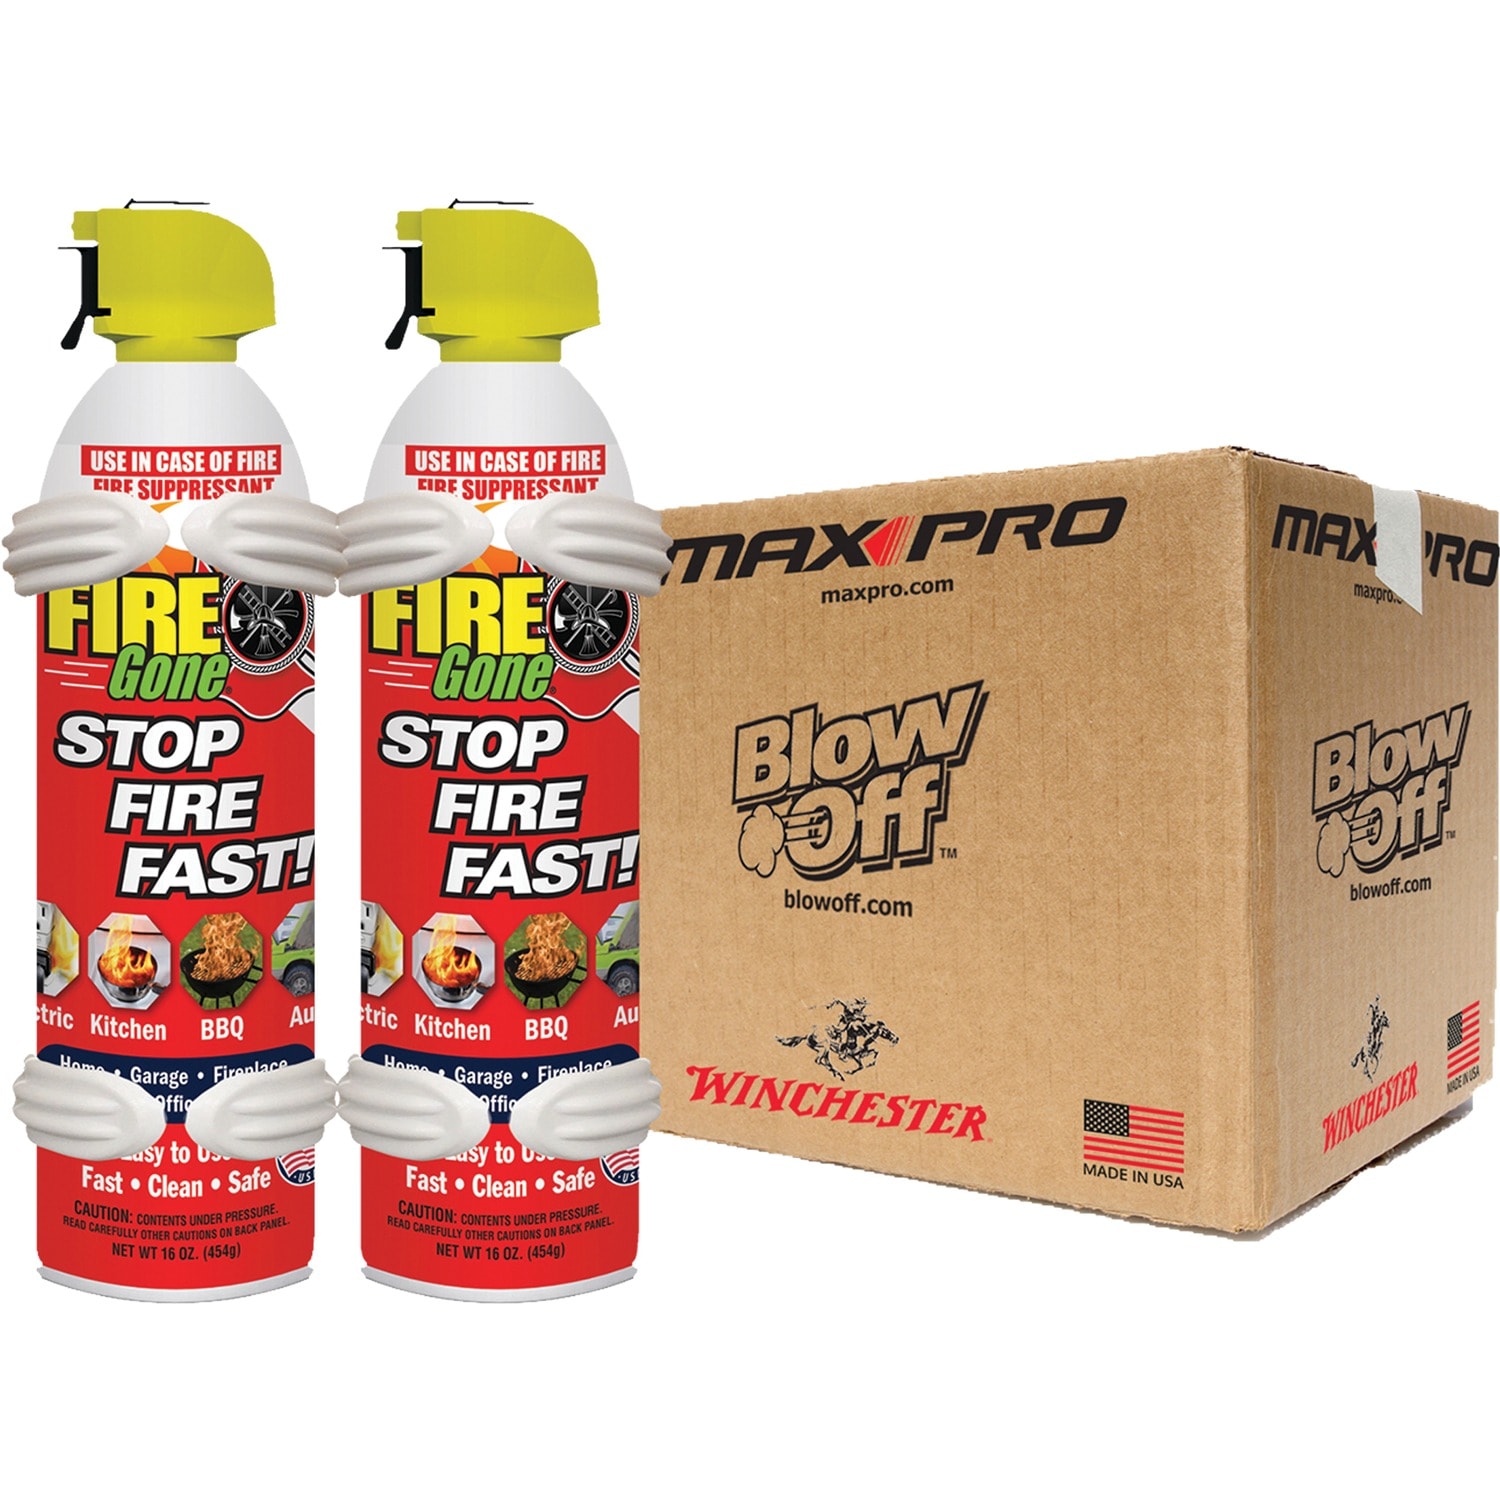 Buying a foam fire extinguisher (AB) 9l BENOR? - Fire